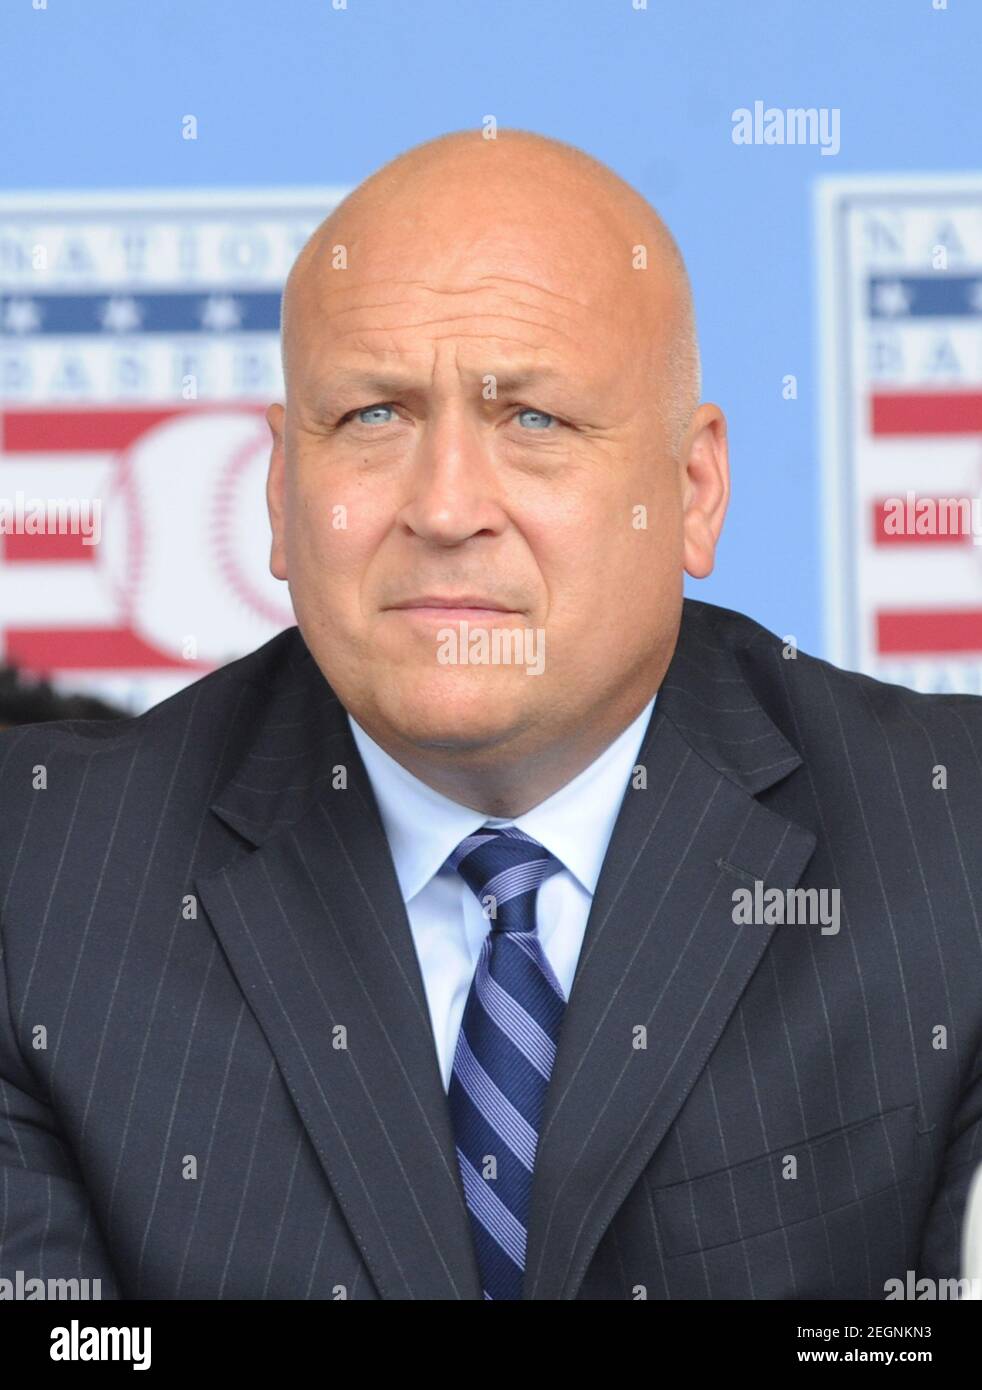 New York, NY-July 28: Cal Ripken Jr. attends the National Baseball Hall of Fame weekend on July 28, 2013 in Cooperstown, New York.Credit: George Napolitano / MediaPunch Stock Photo